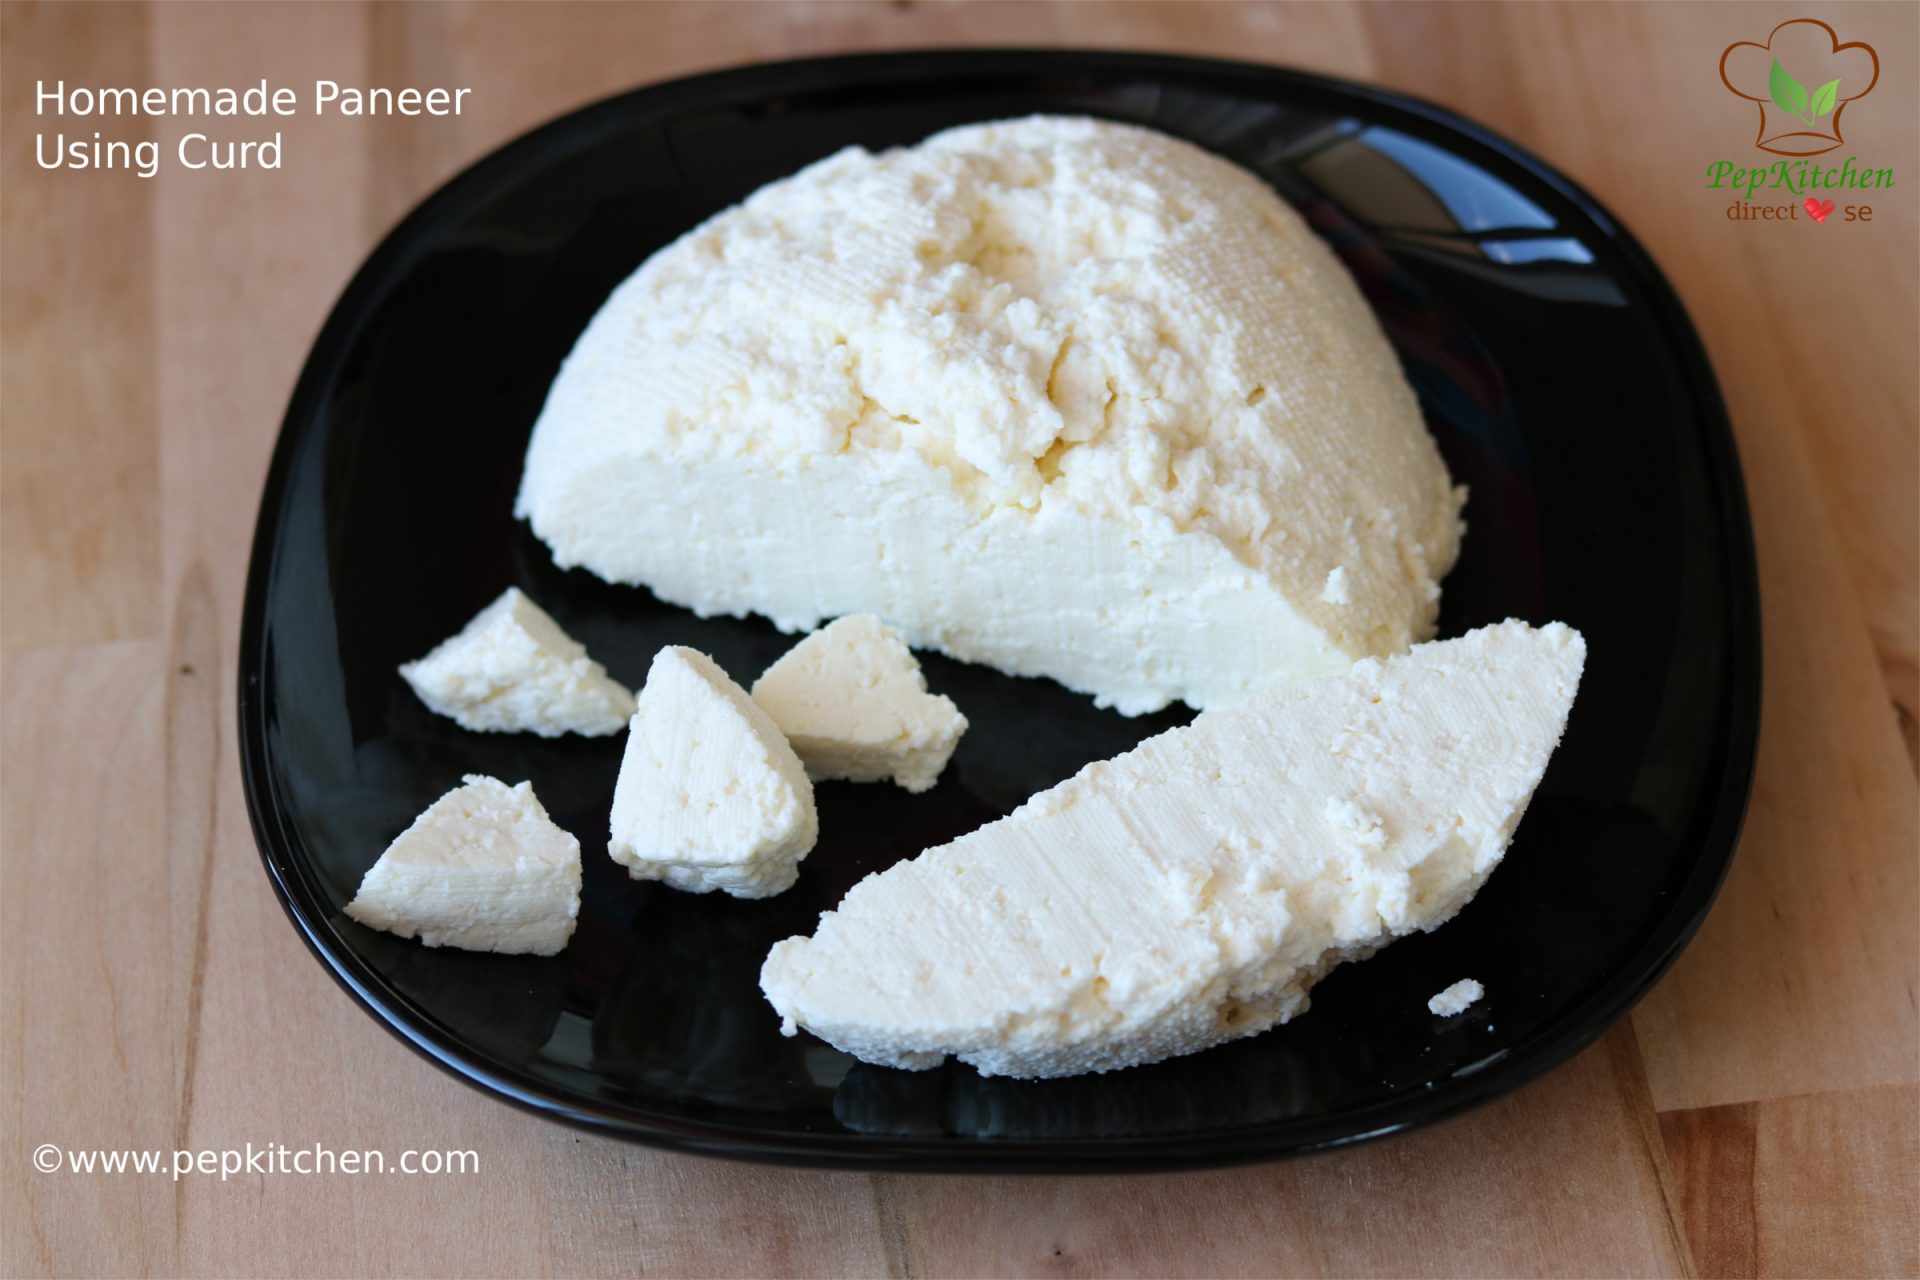 Homemade Paneer Using Curd (Cottage Cheese)